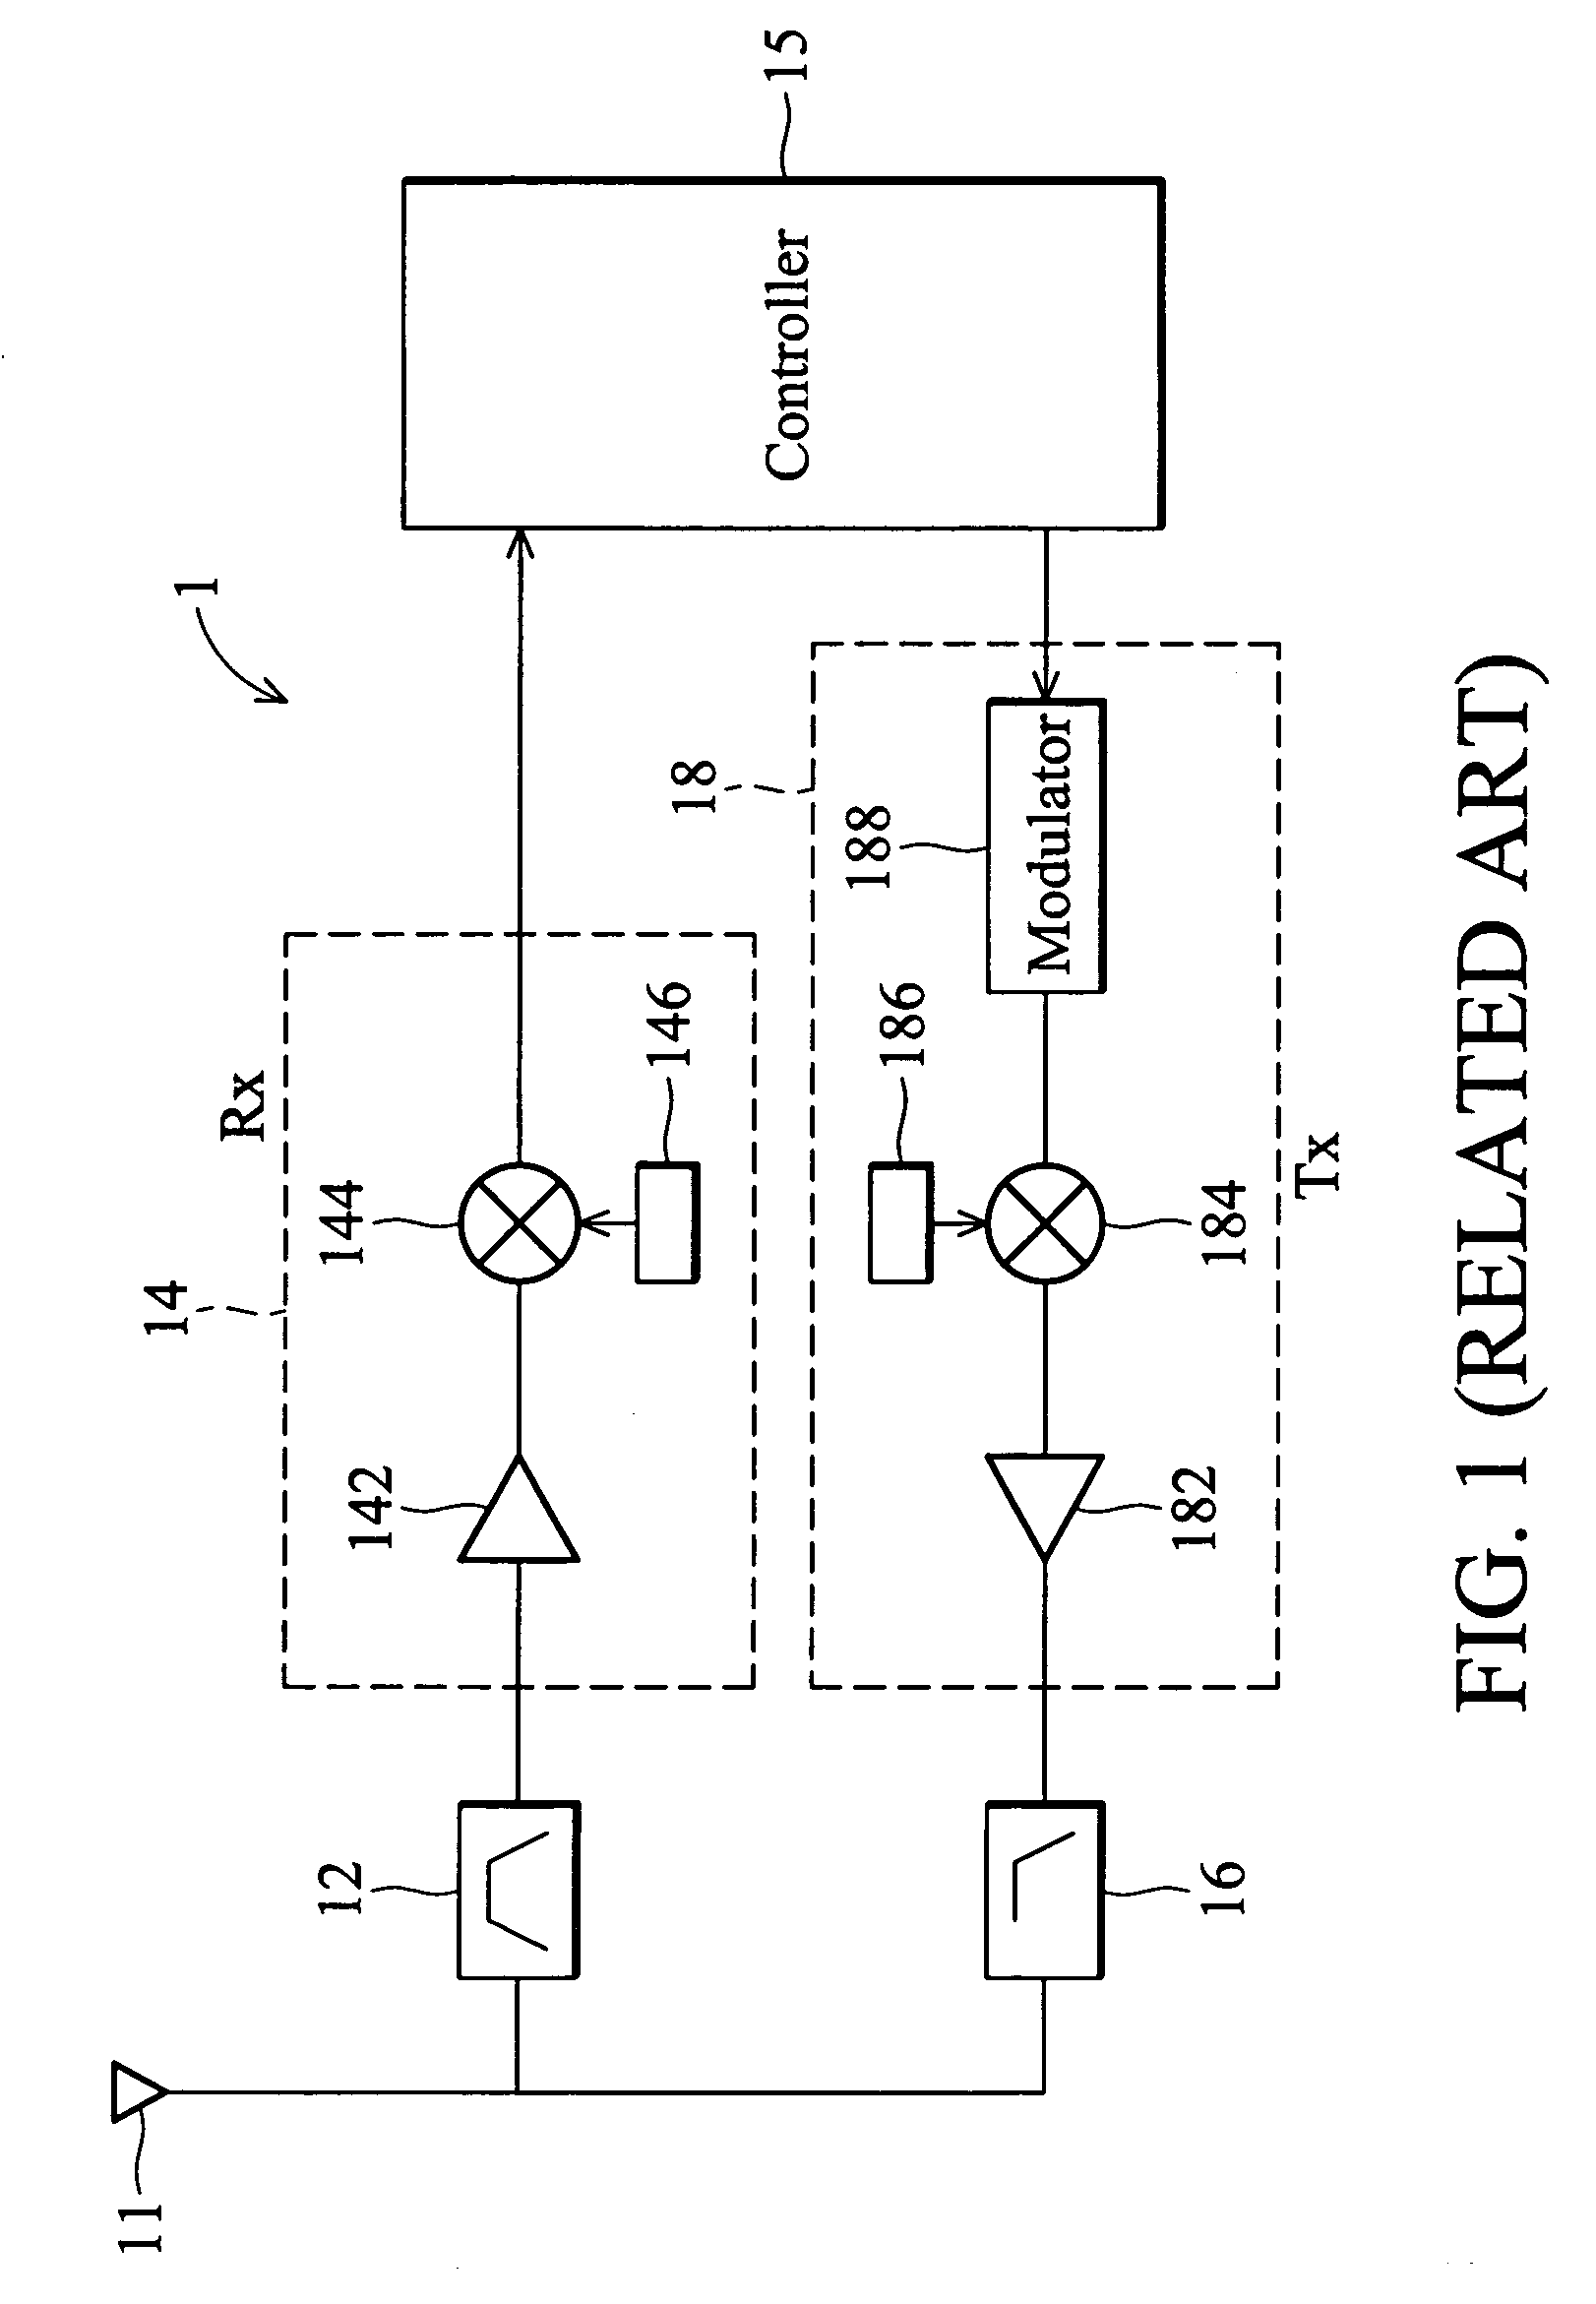 Personal communication device with transmitted RF power strength indicator